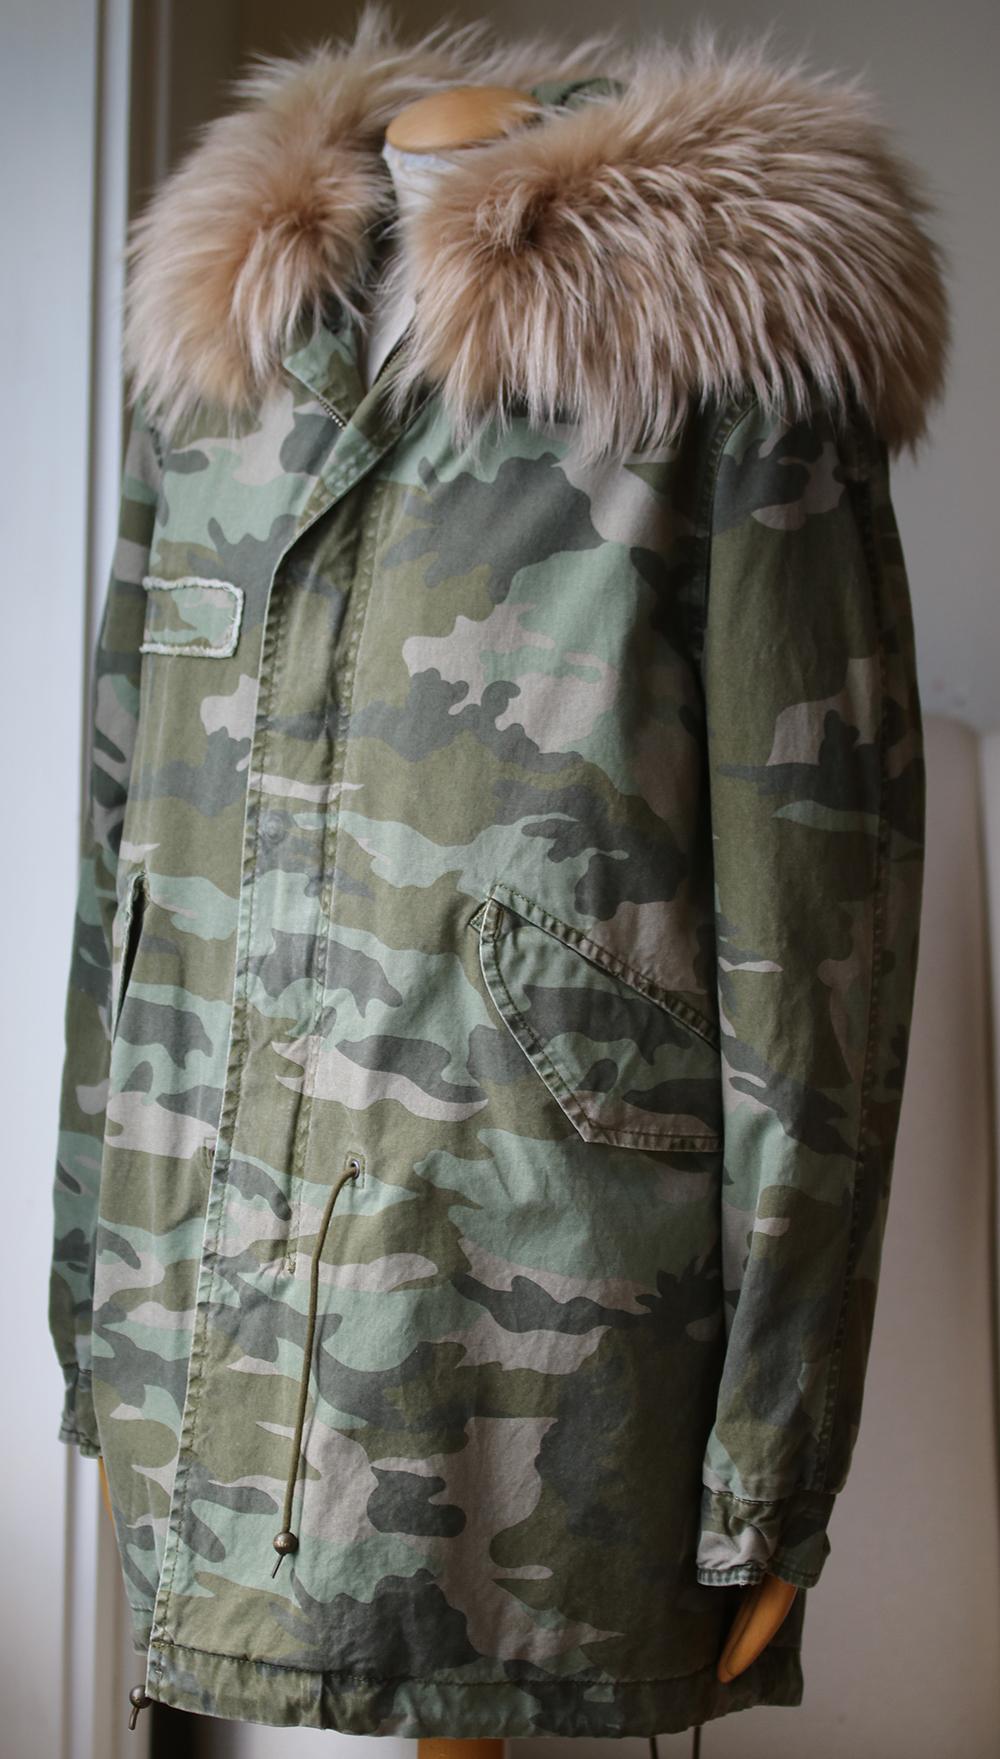 This camo-print Mr & Mrs Italy coat has a full raccoon fur collar, giving the military-inspired style a unique, luxurious twist. Snaps conceal the zip closure, and toggled cords cinch the waist and hem. 2 pockets. Long sleeves. Fiber fill. Fur: Dyed